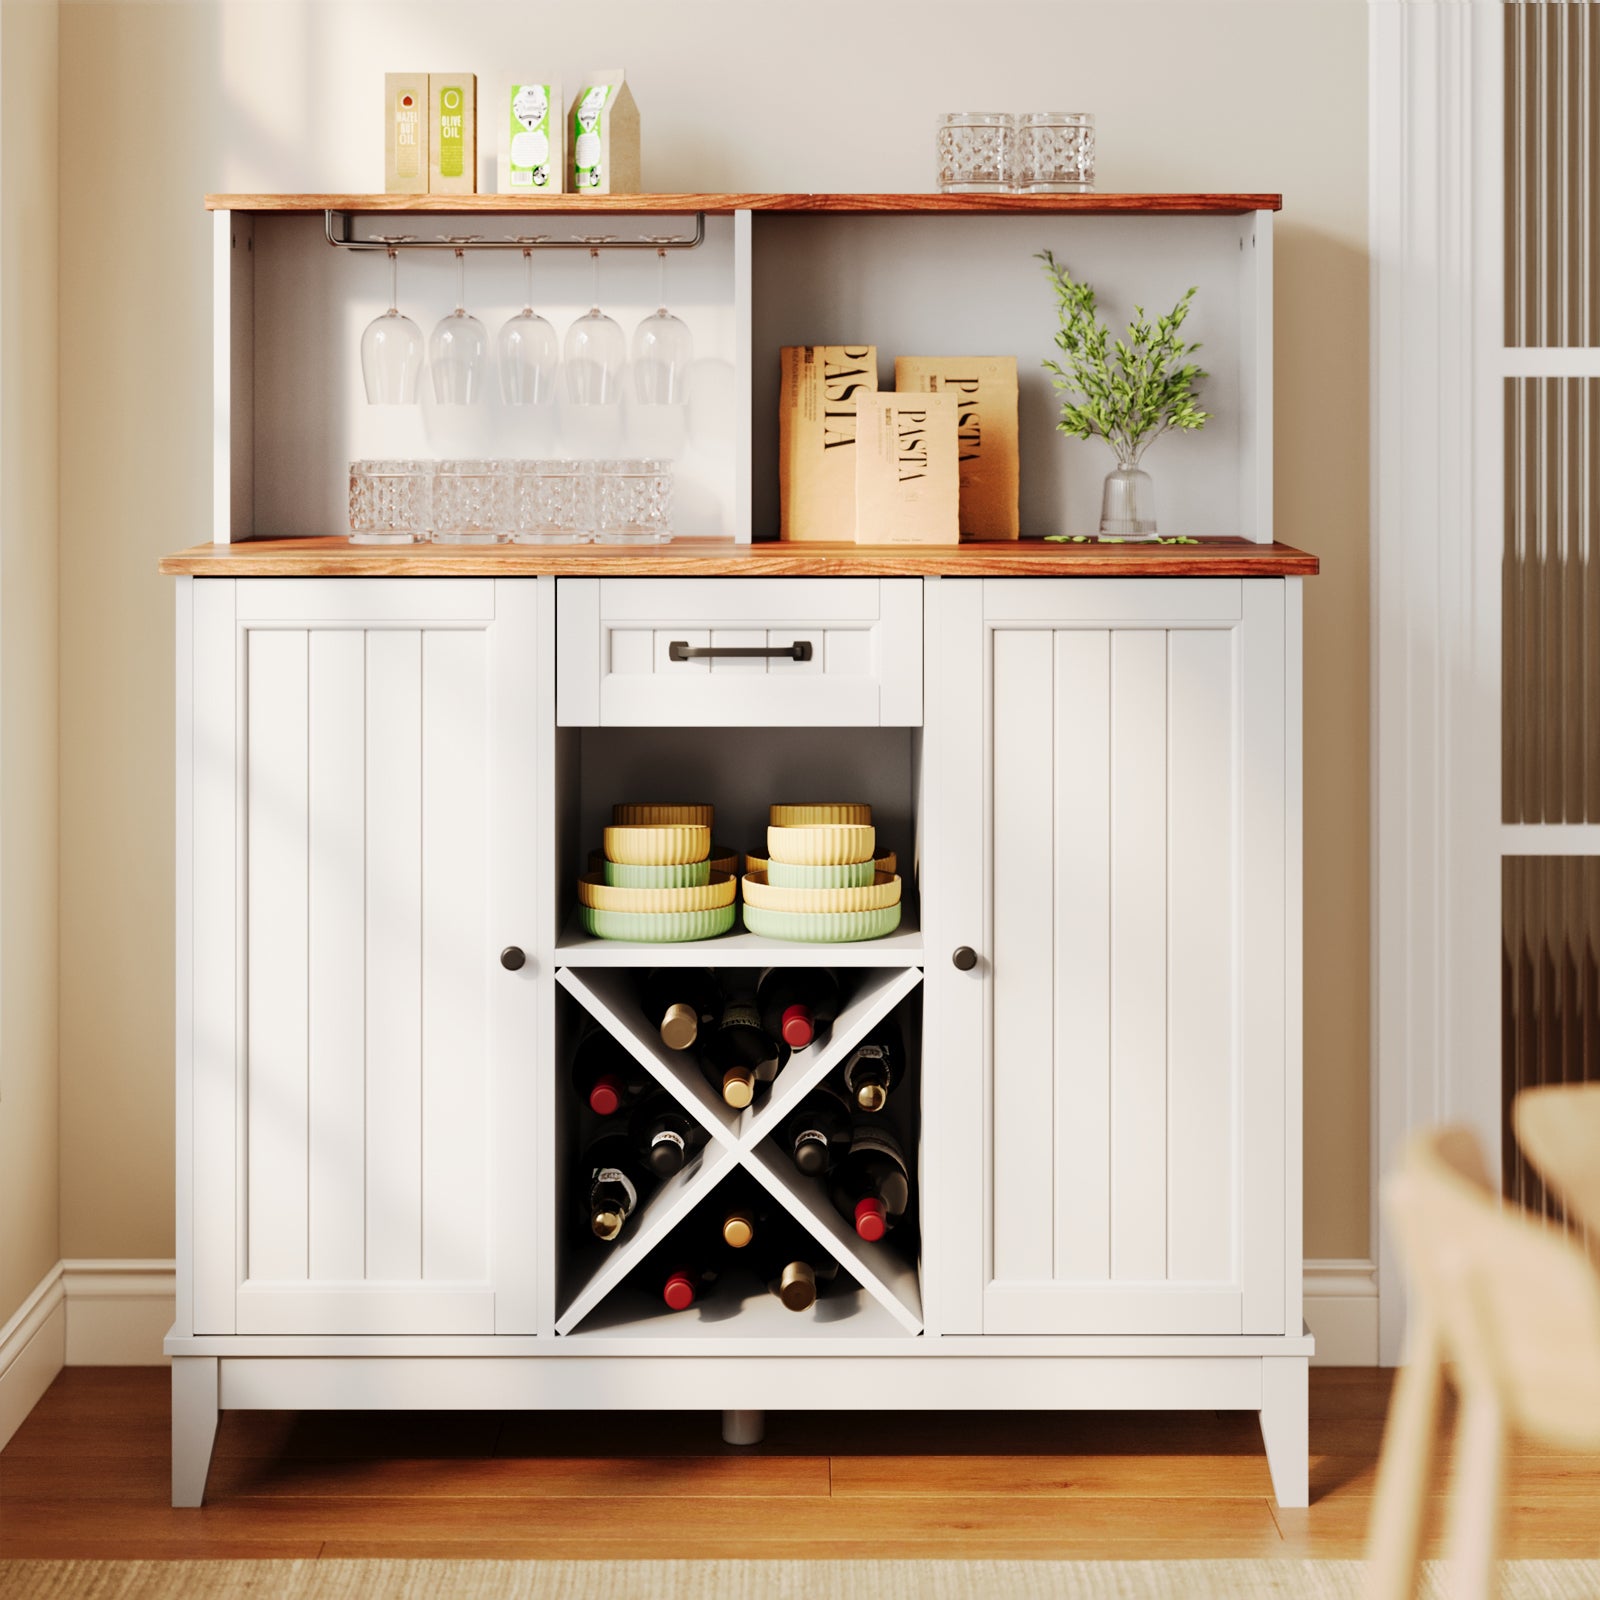 Gizoon WS20 Coffee Wine Bar Cabinet with Wine Rack and Goblet Holder